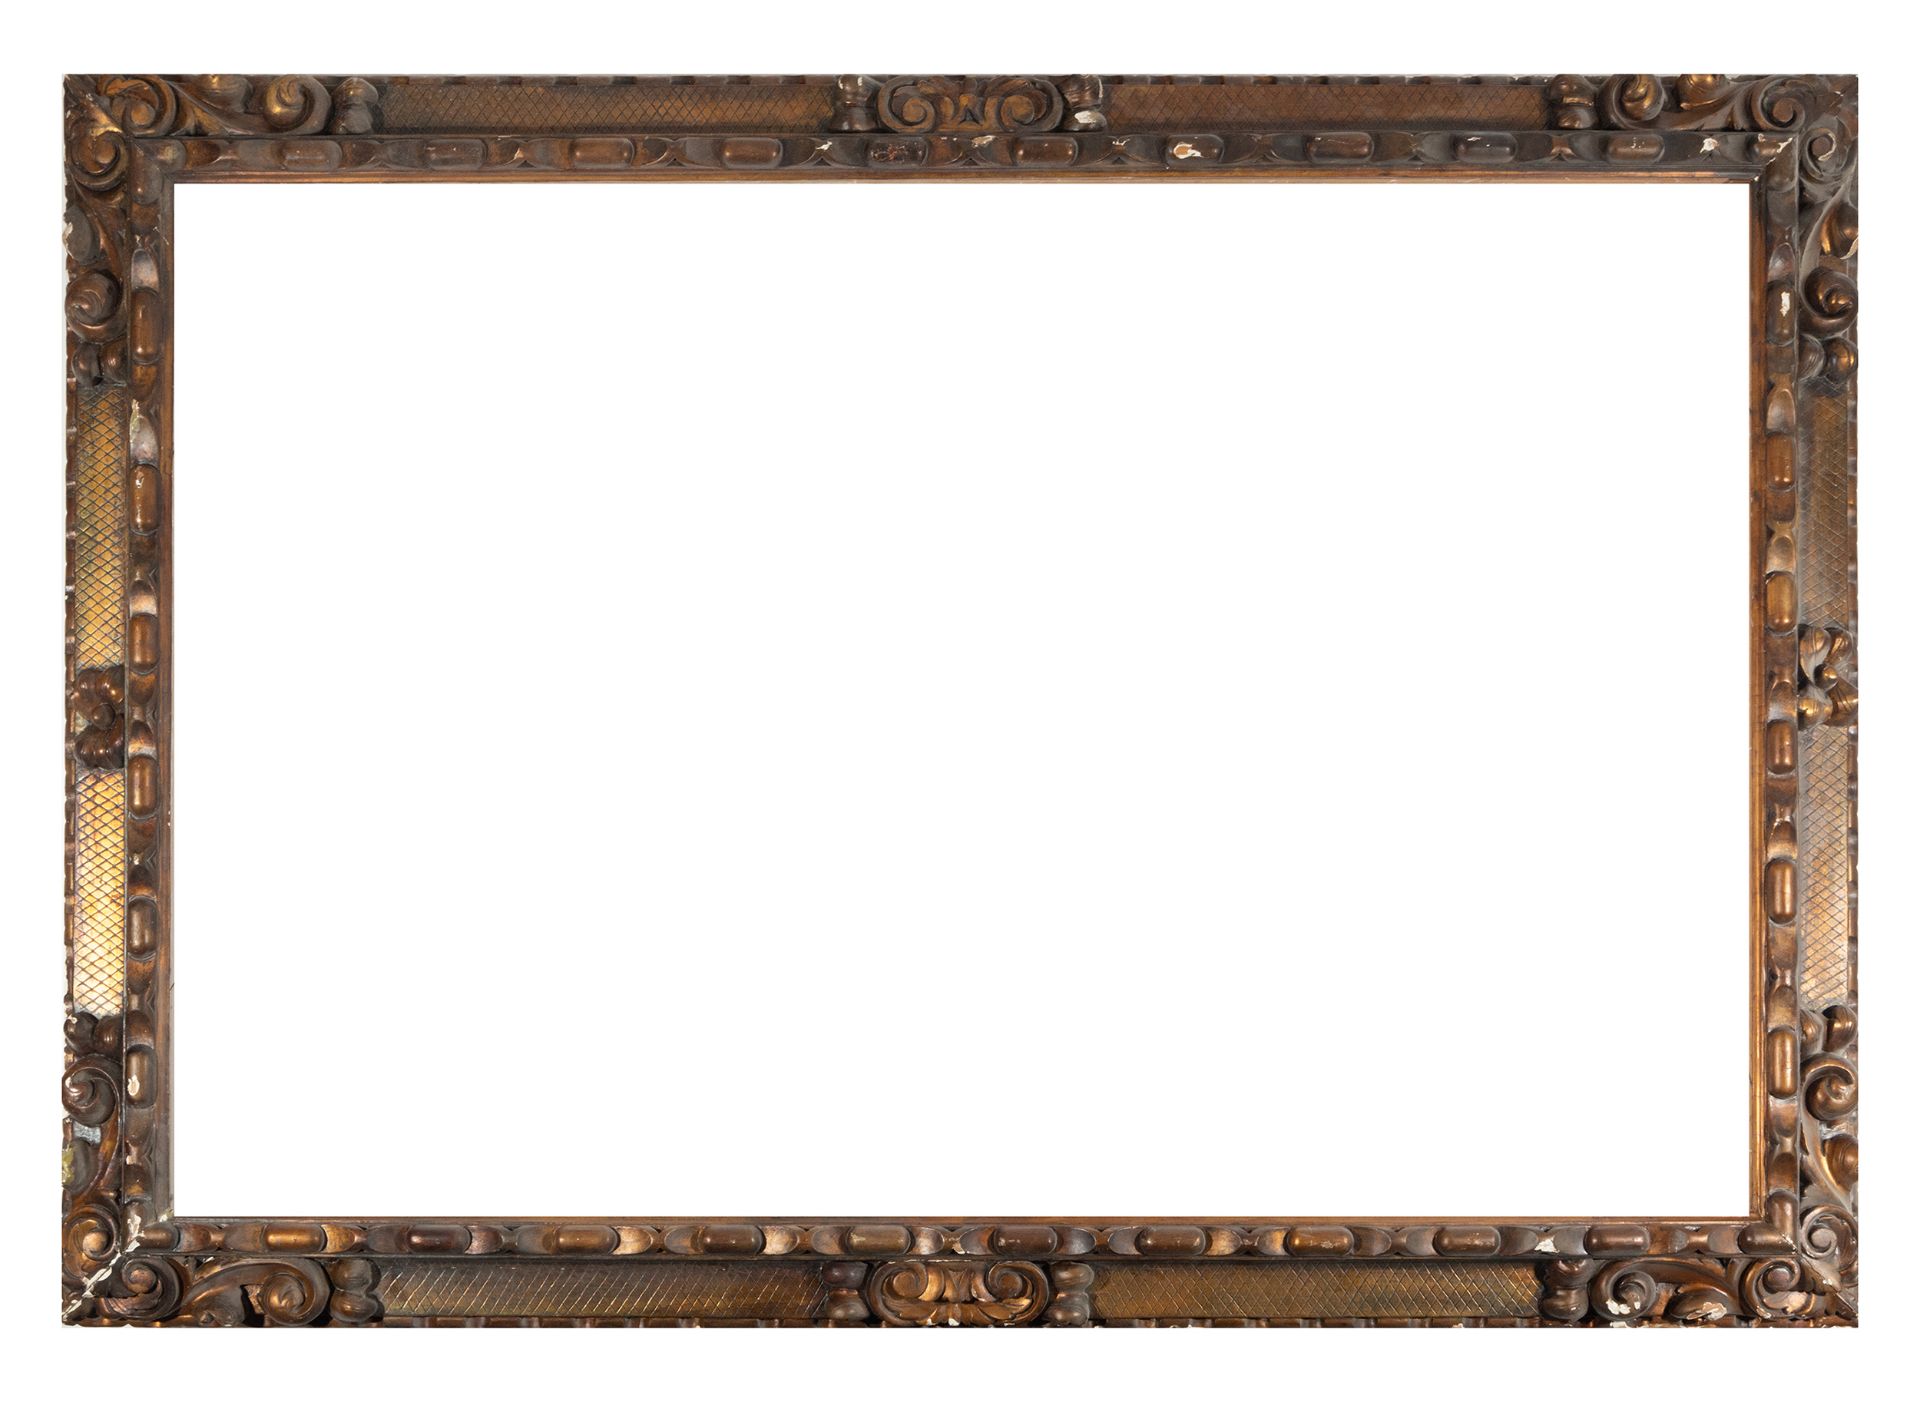 Large Baroque-style frame in gilded wood, 19th century